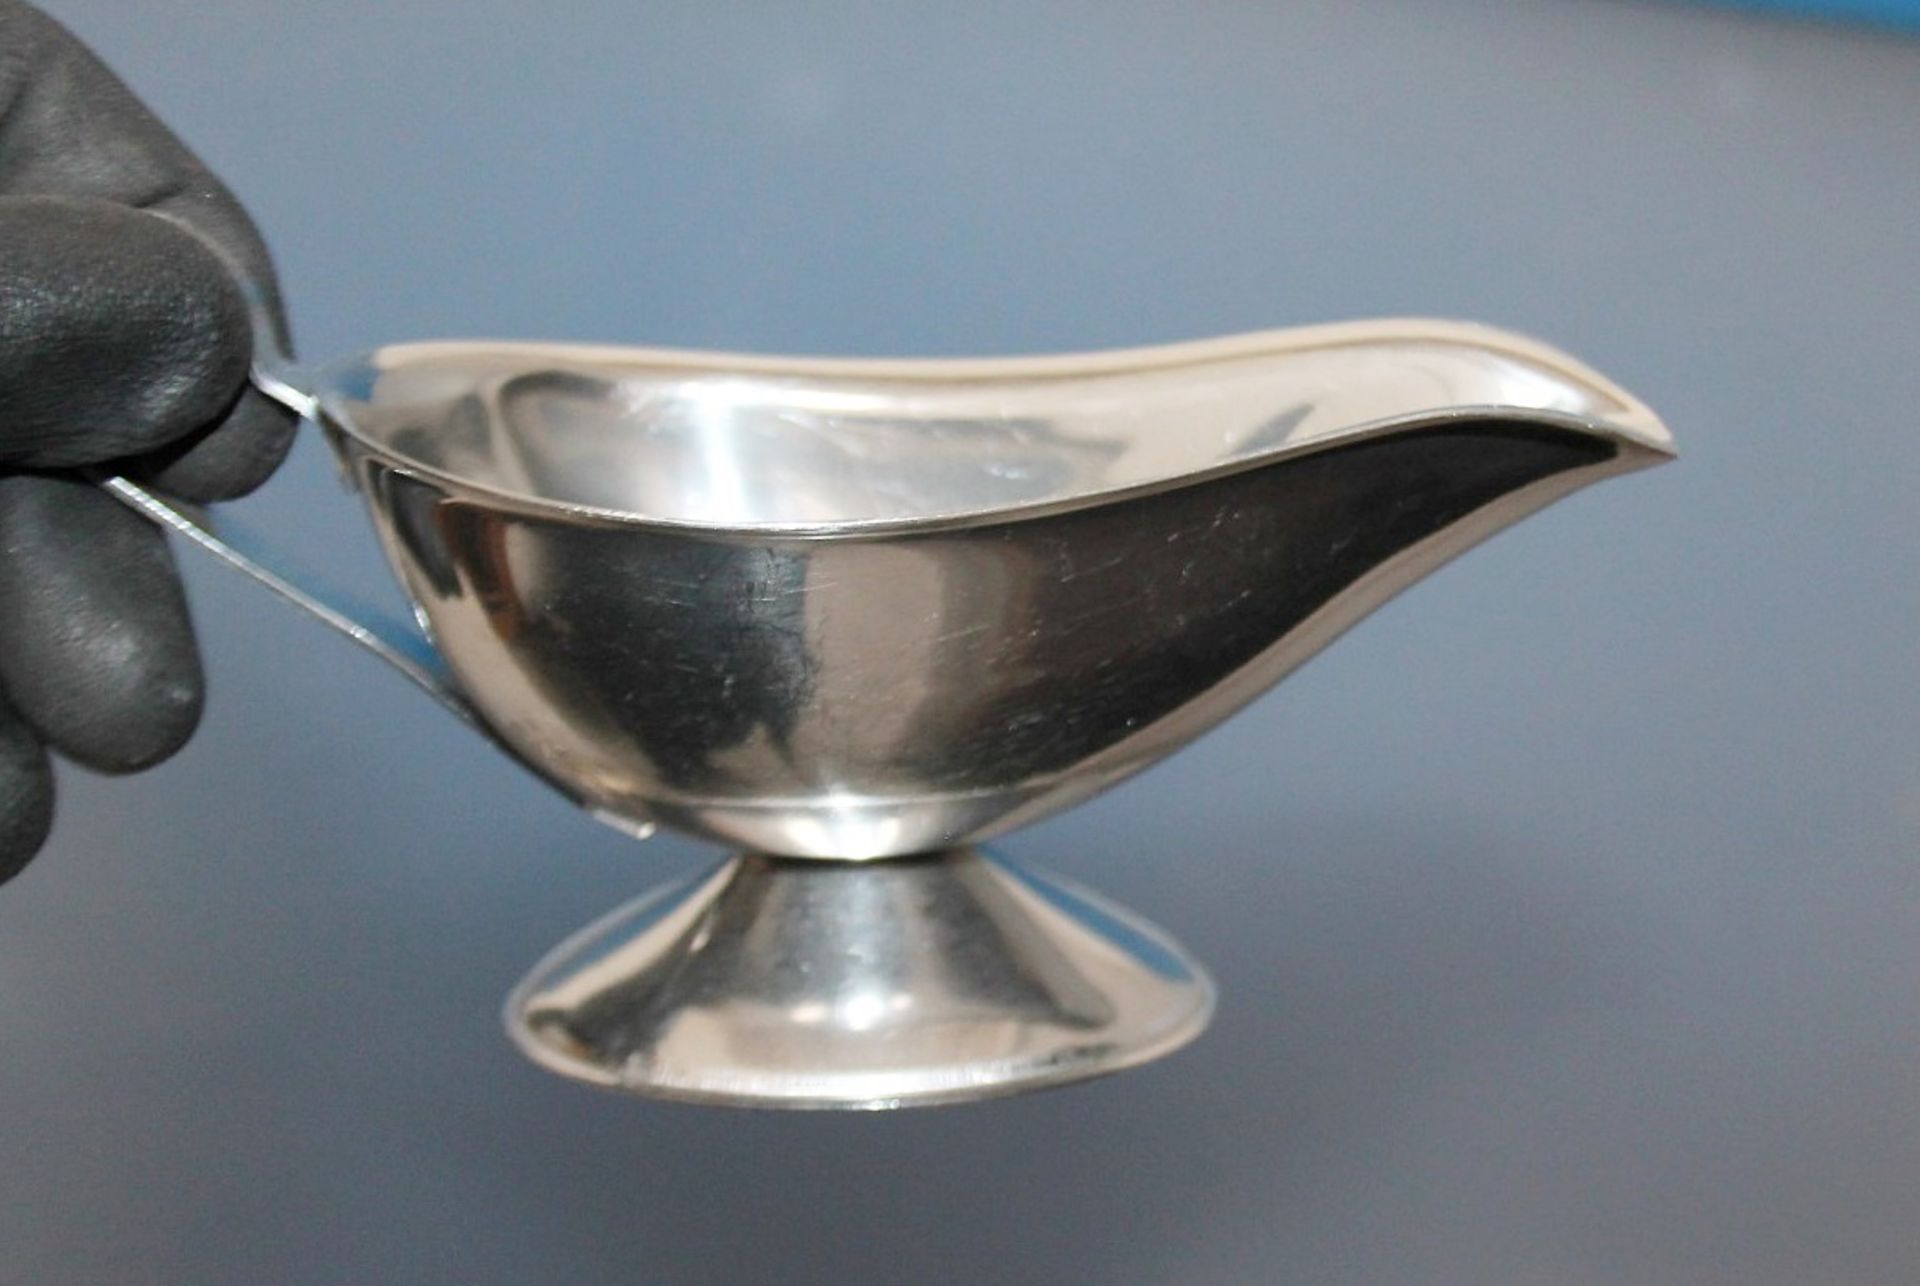 30 x Assorted Silver-Plated Sauce Boats - The Majority Strong and Woodhatch Branded - Recently - Image 8 of 8